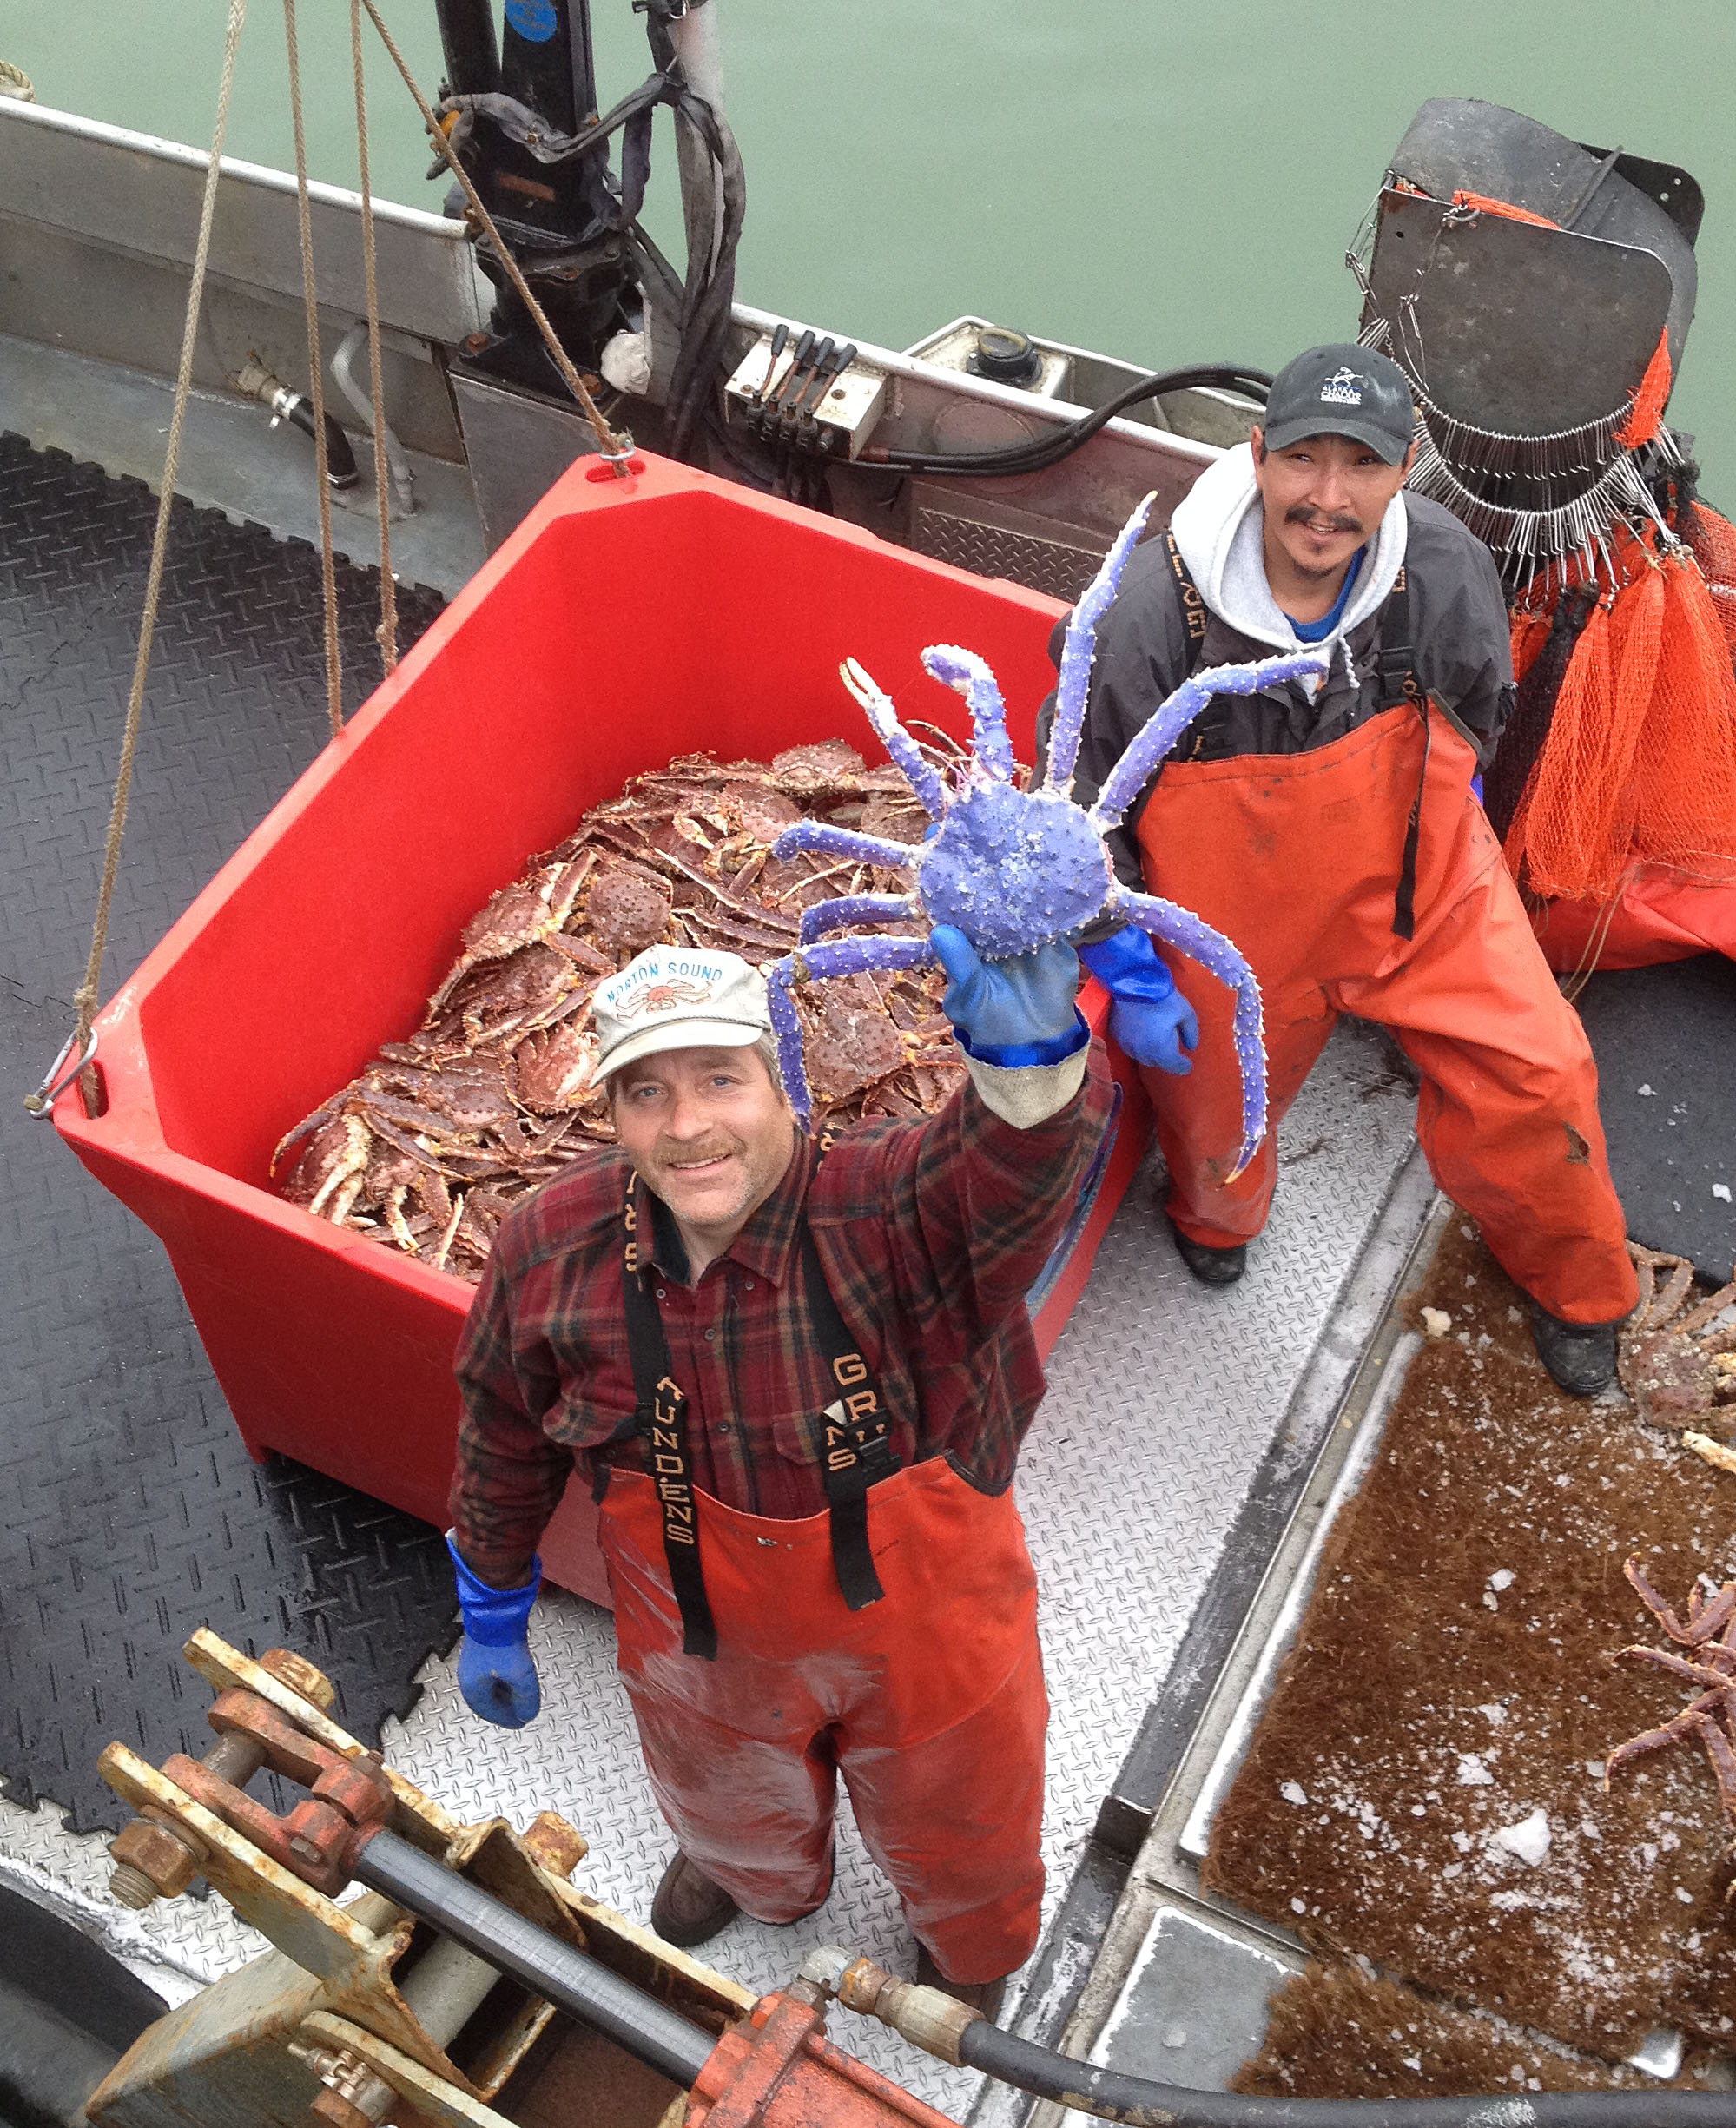 PHOTO: Crab fisherman Frank McFarland, left, holds up a rare blue-colored red king crab he caught in his commercial crabbing pots as Frank Kavairlook Jr., right, looks on in Nome, Alaska, July 4, 2014.